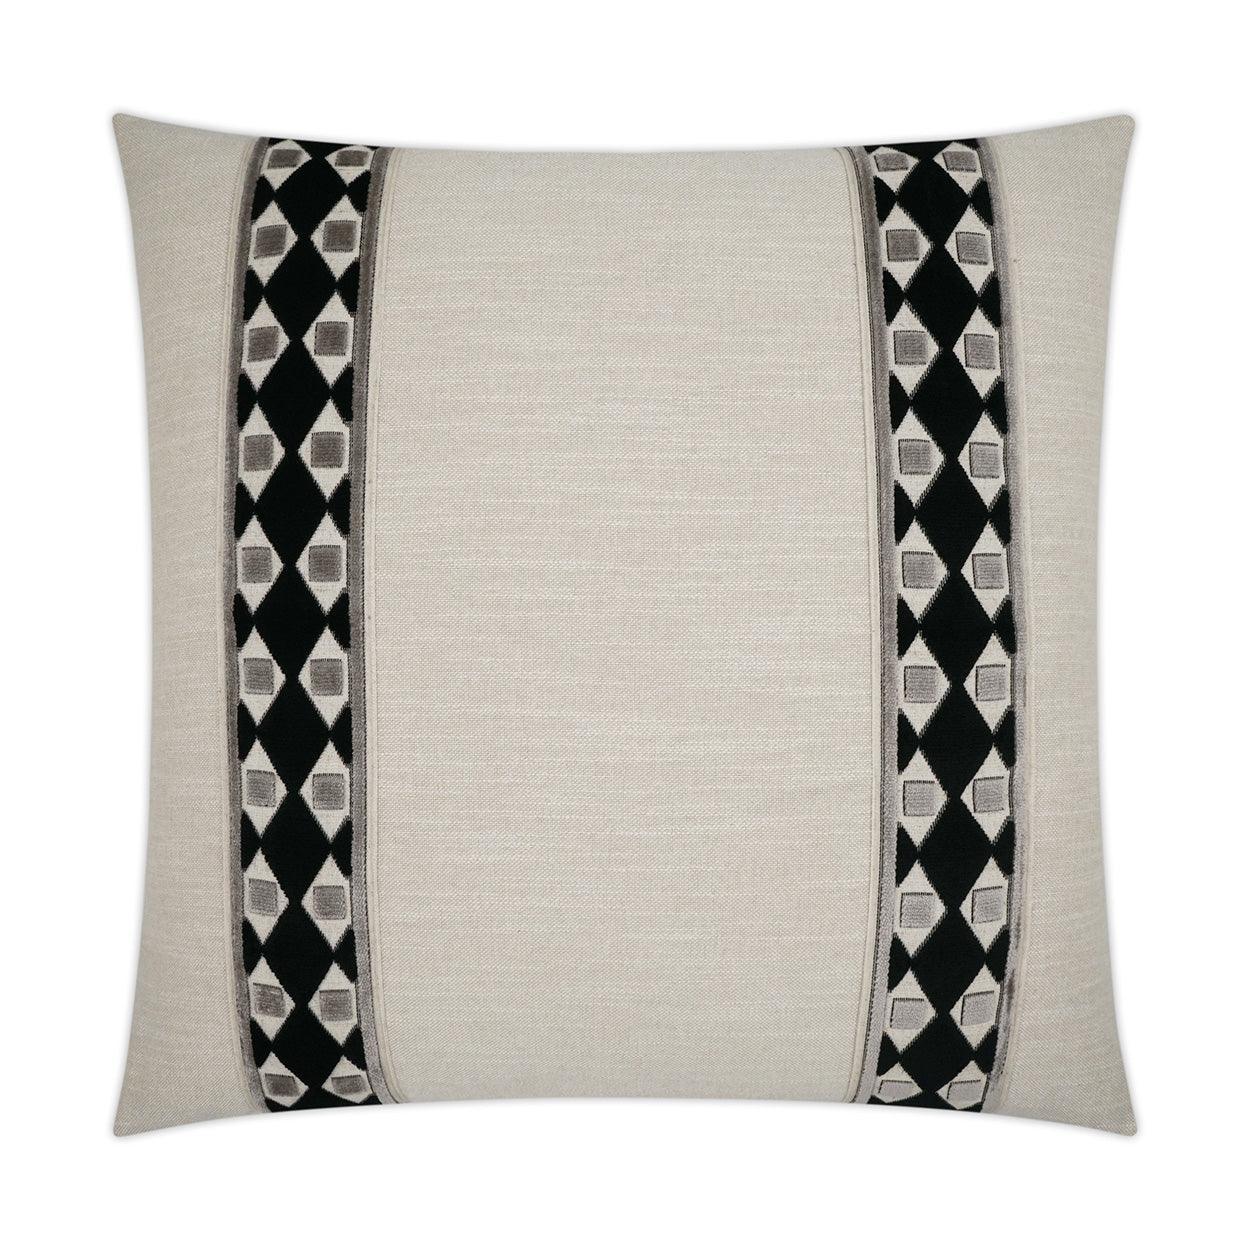 Cirque Black Band Ivory Black Large Throw Pillow With Insert - Uptown Sebastian